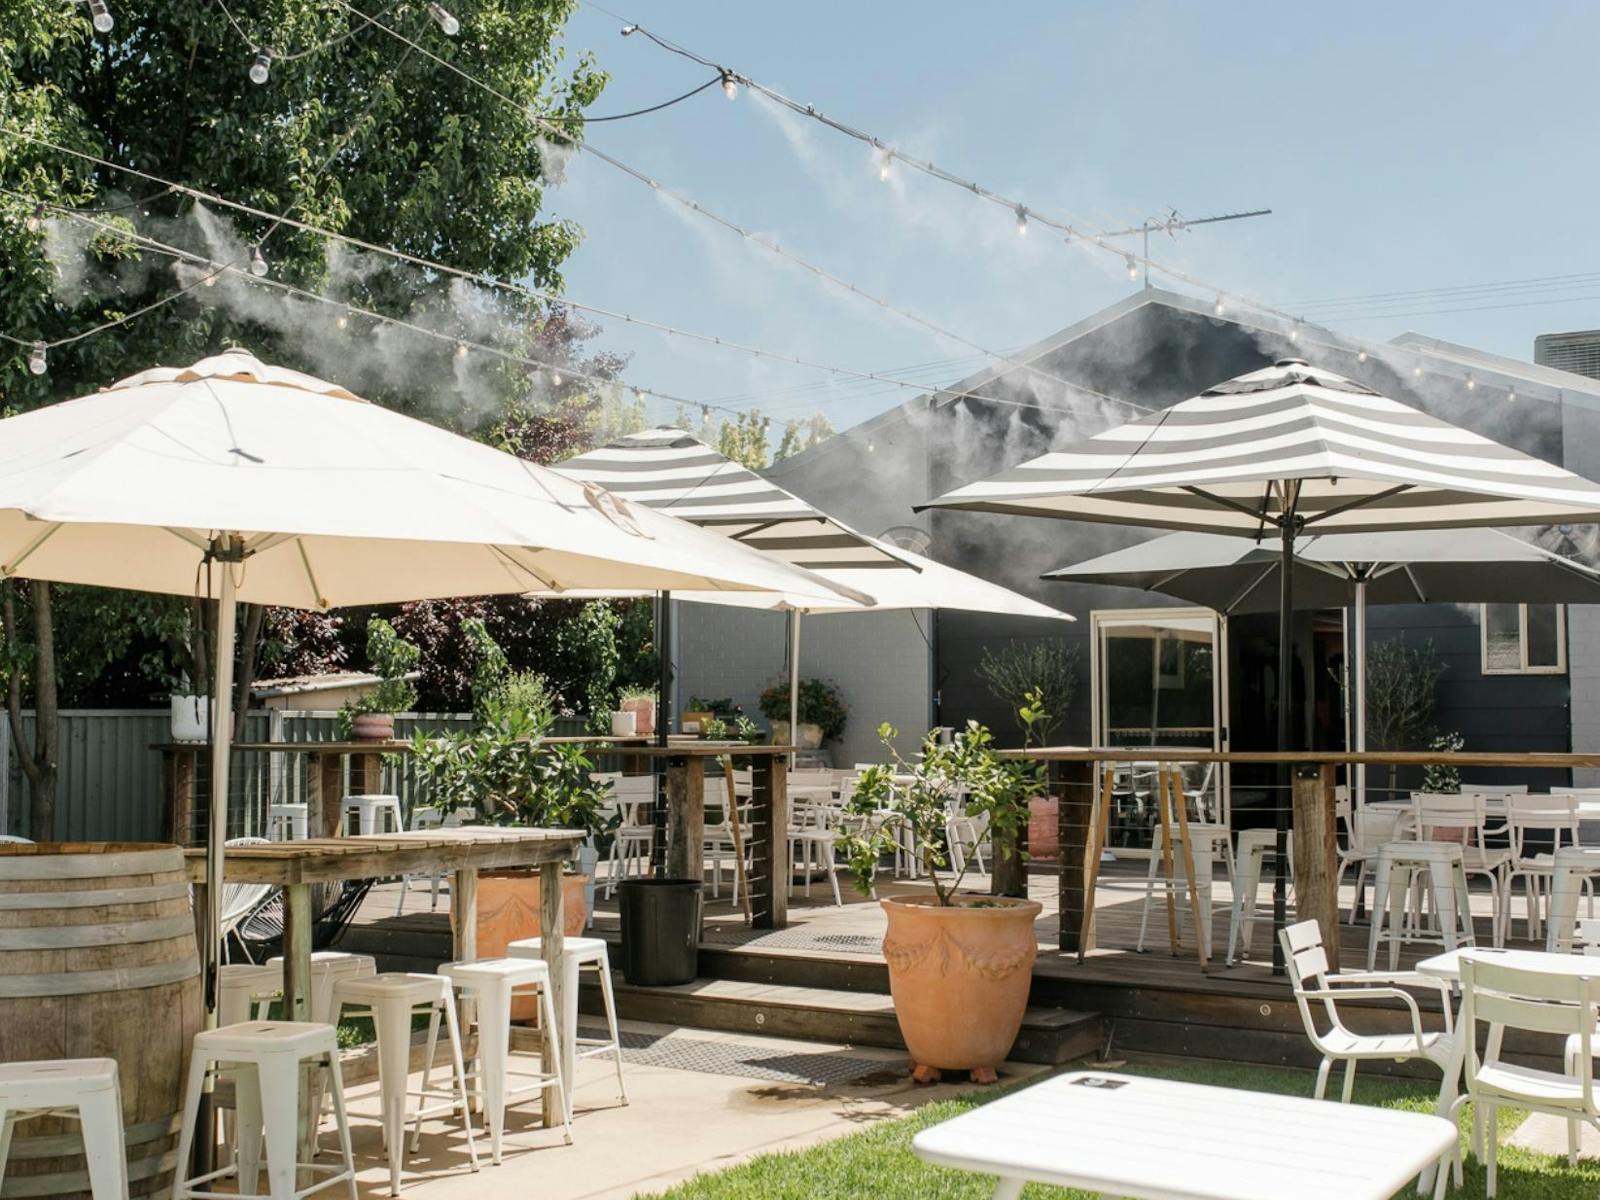 Enjoy the outdoor area (off the Main Street at rear of our cellar door) with misting system.